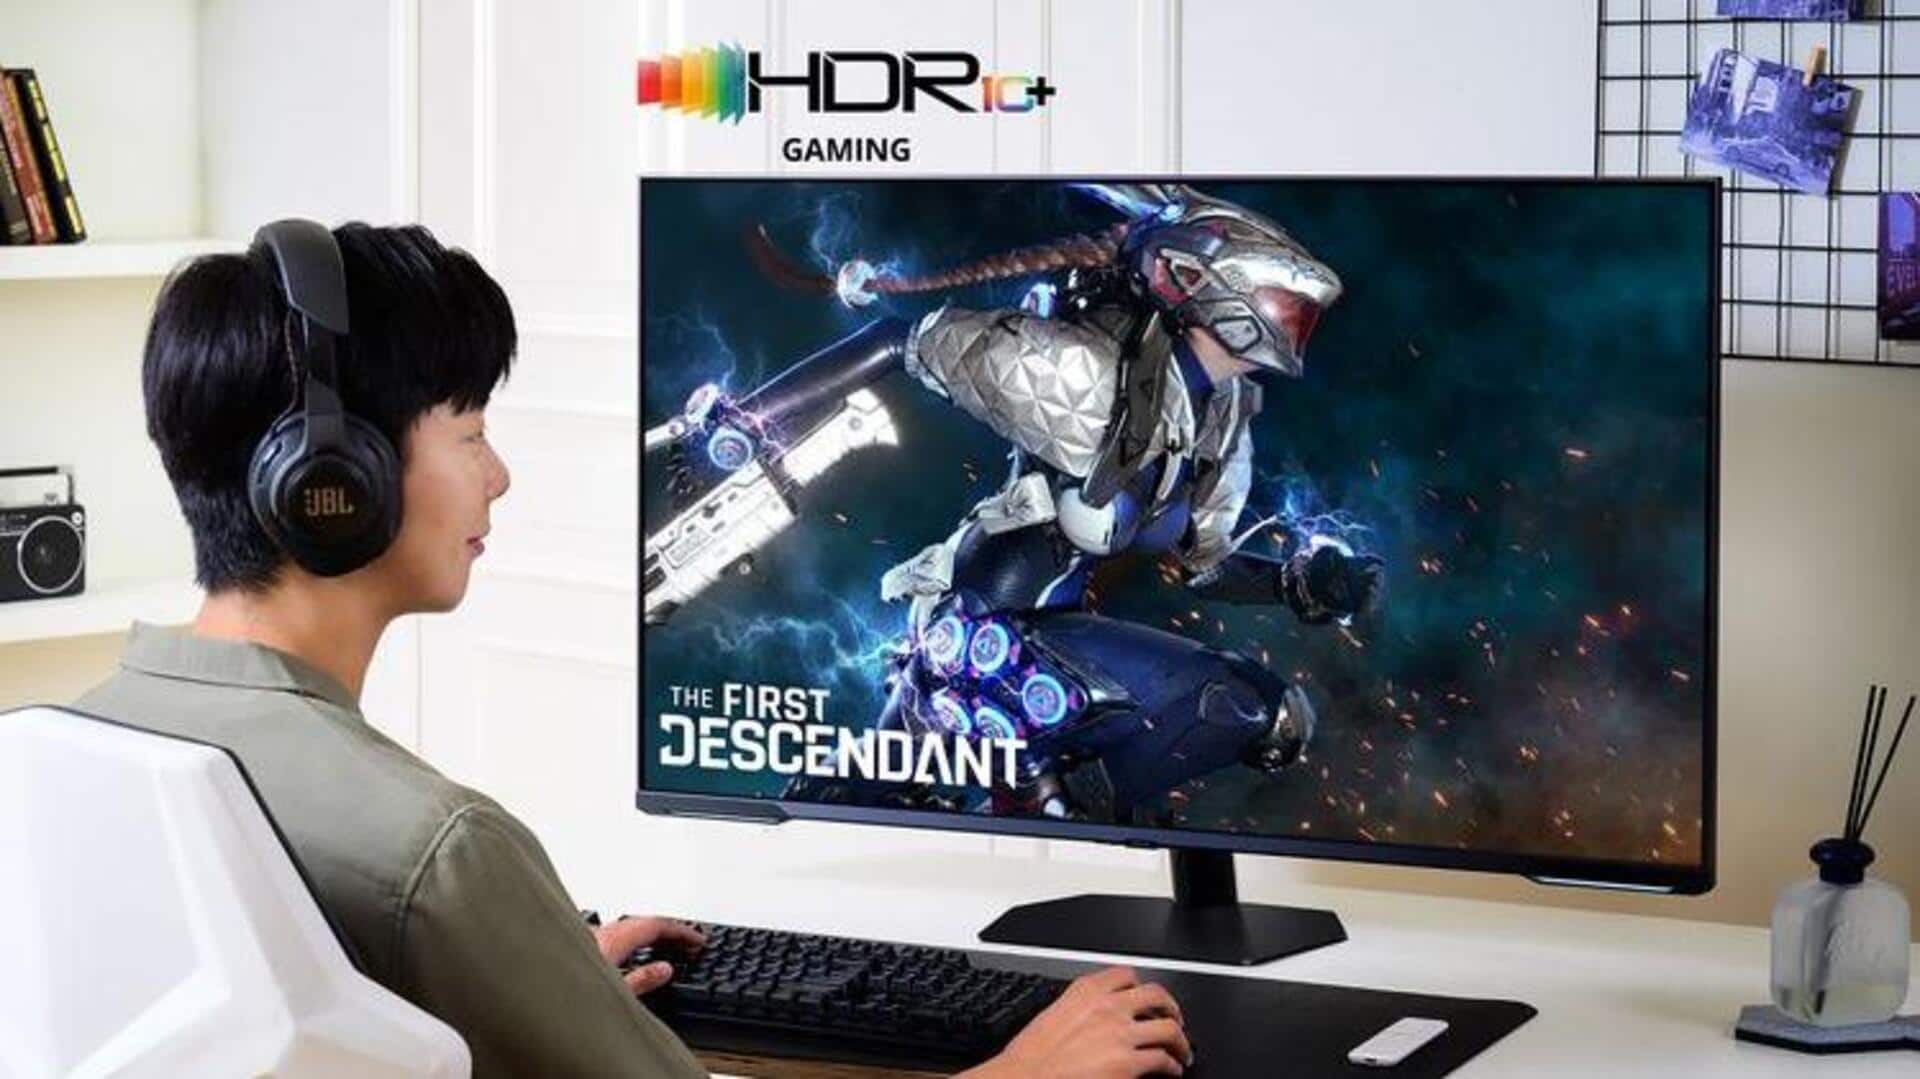 Samsung unveils world's first HDR10+ gaming title, The First Descendant